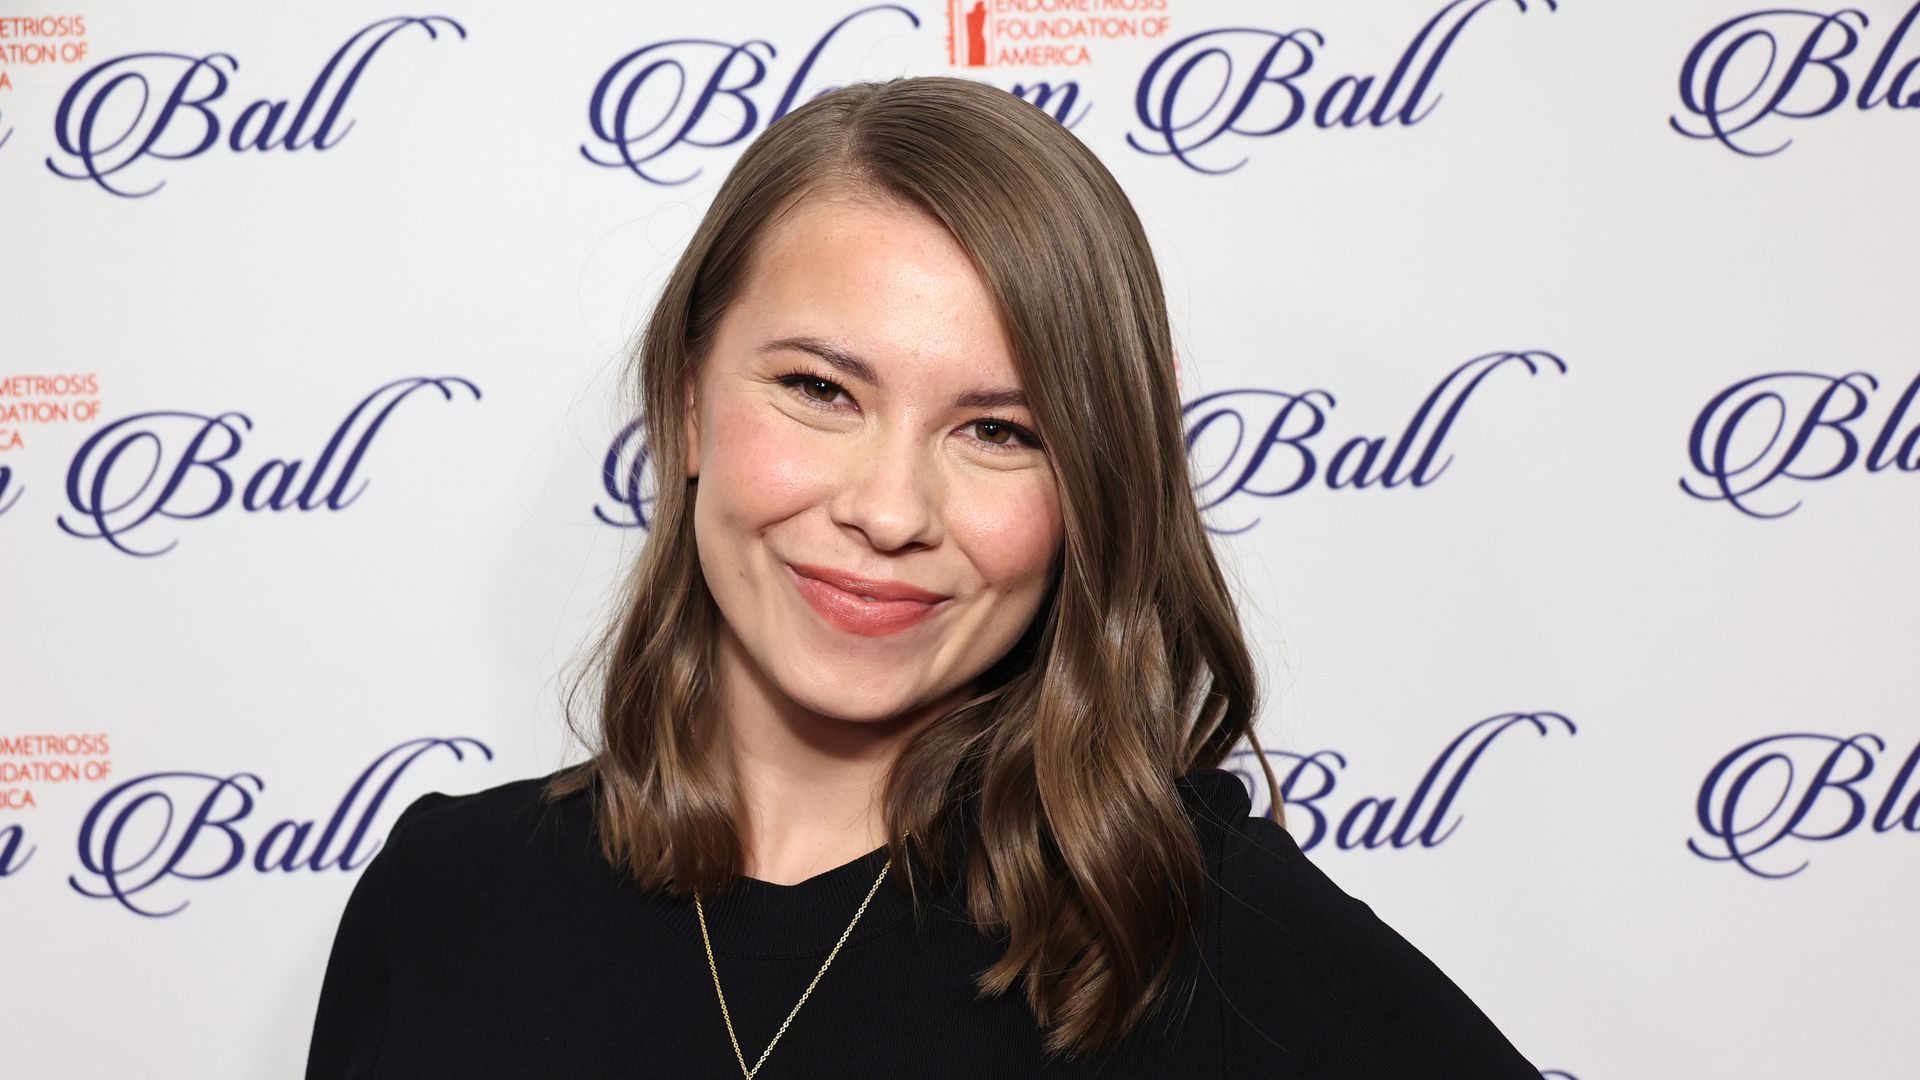 Bindi Irwin feels 'more alive than I have since I was a child' after undergoing surgery for endometriosis